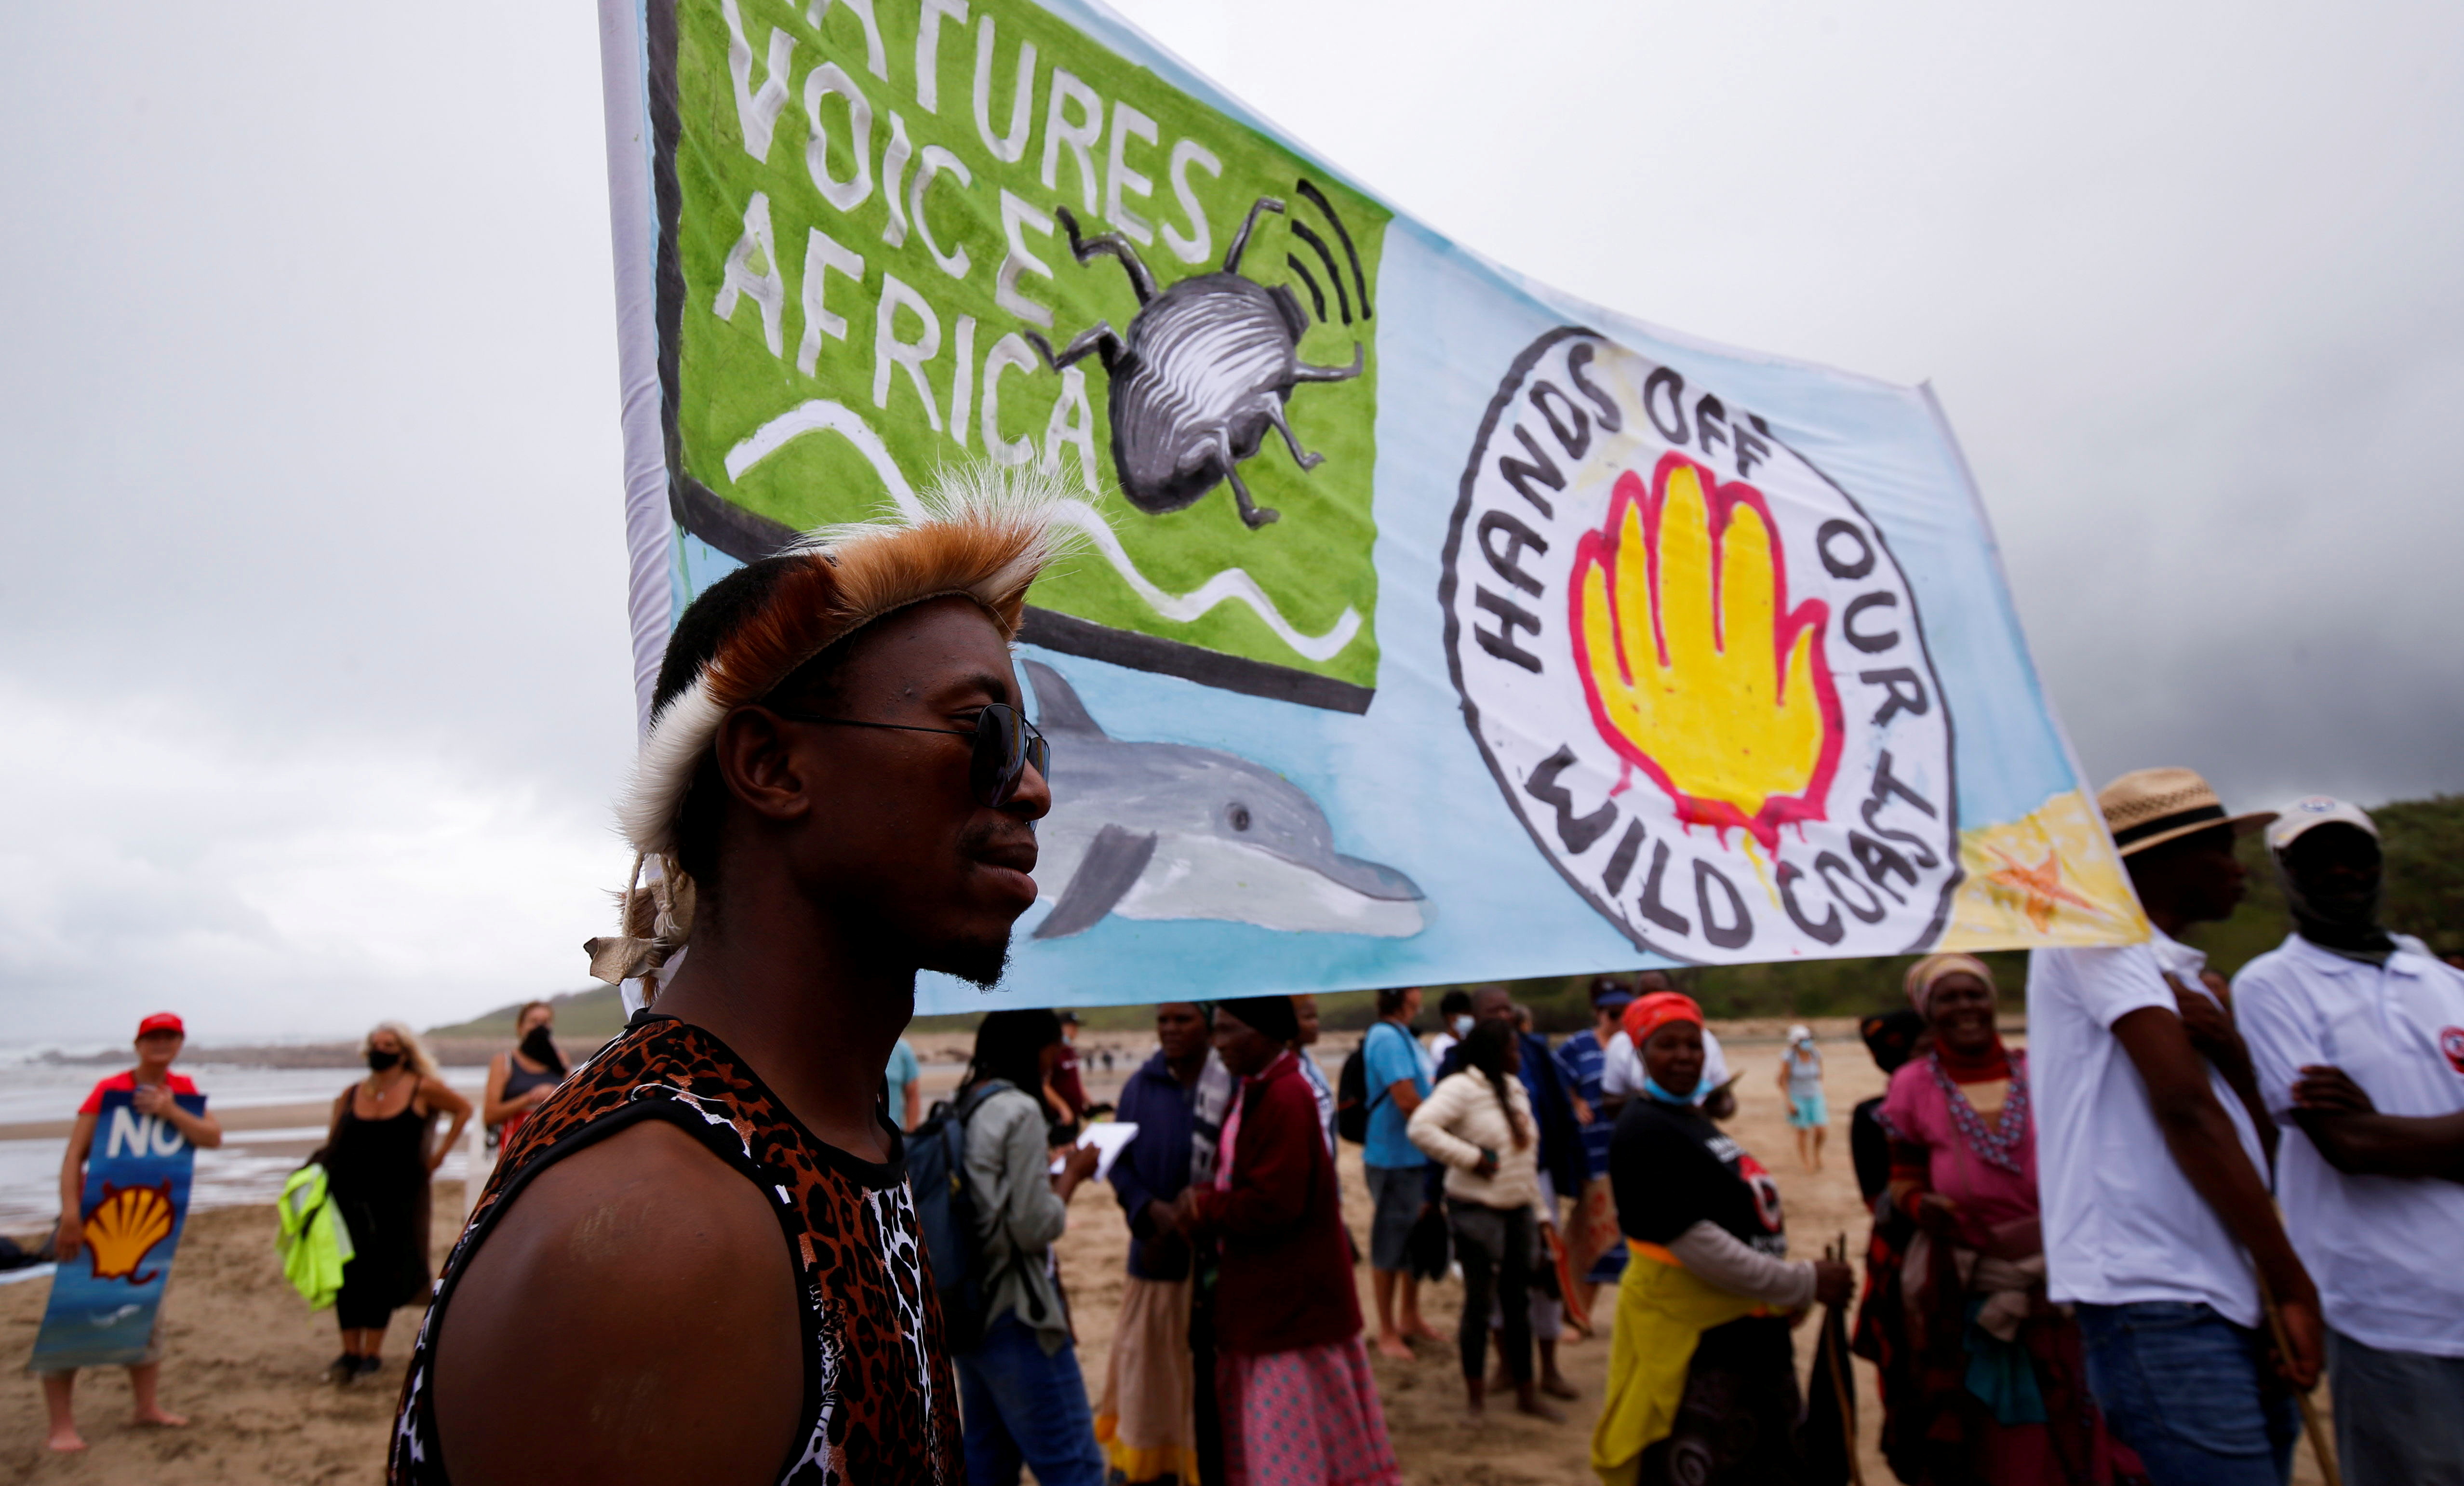 A protest against Royal Dutch Shell's plans to start seismic surveys to explore petroleum systems on South Africa's popular Wild Coast. www.theexchange.africa